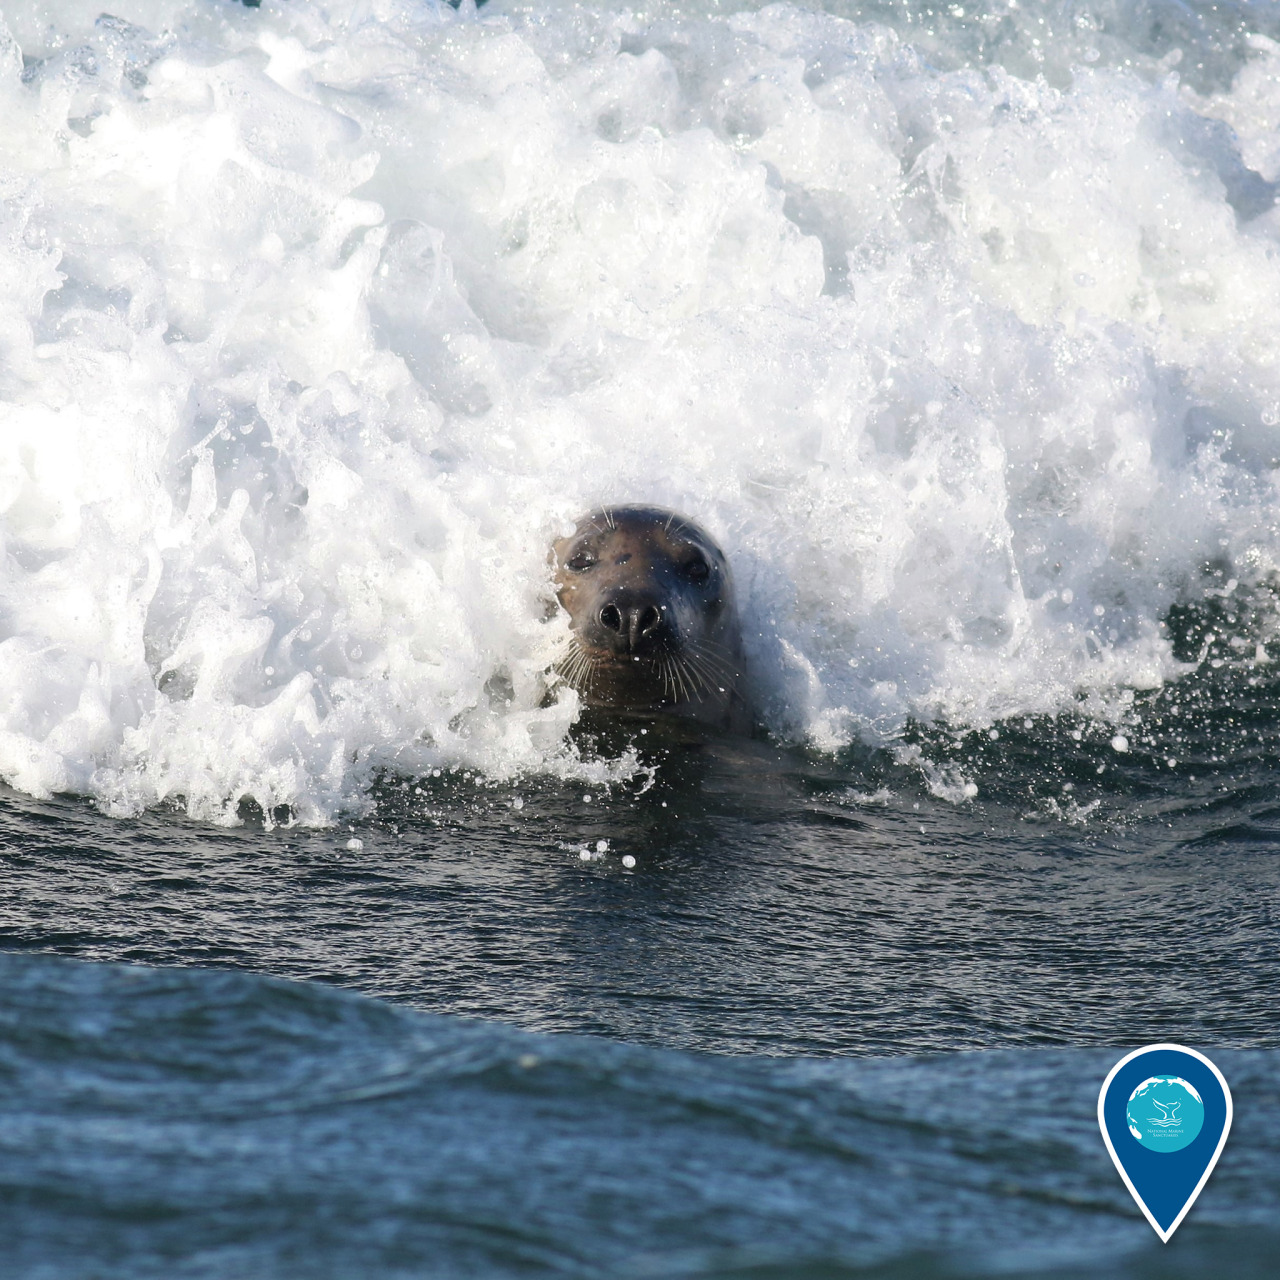 Surf’s up! This gray seal peeks out ahead of a wave crashing at Race Point Beach in Cape Cod National Seashore, just outside Stellwagen Bank National Marine Sanctuary. Gray seals are often spotted within the sanctuary, where they feed on fish,...